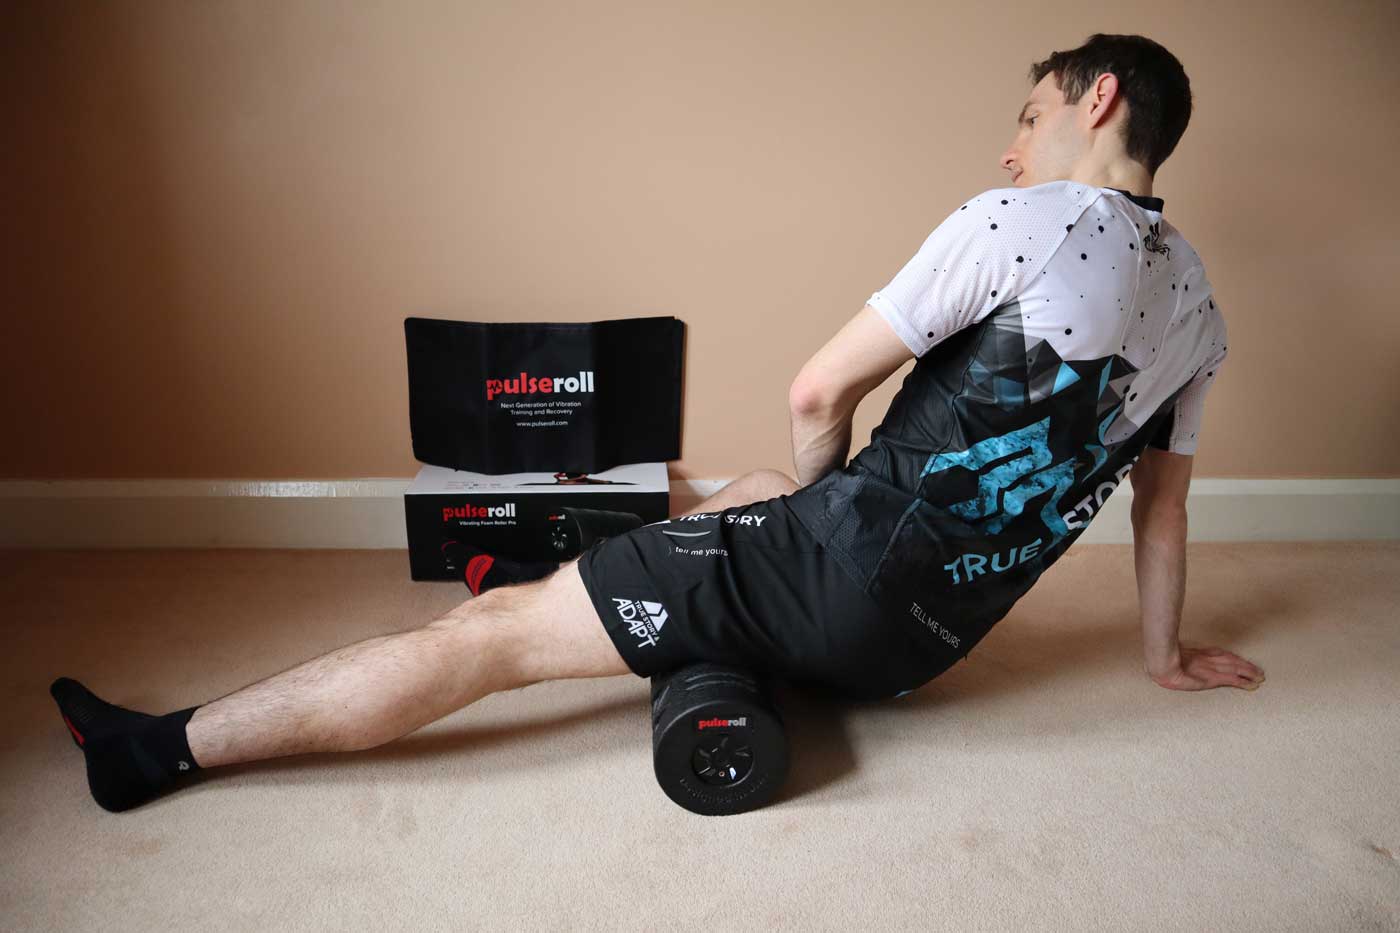 Working the inside quads with the Pulseroll Vibrating Foam Roller Pro